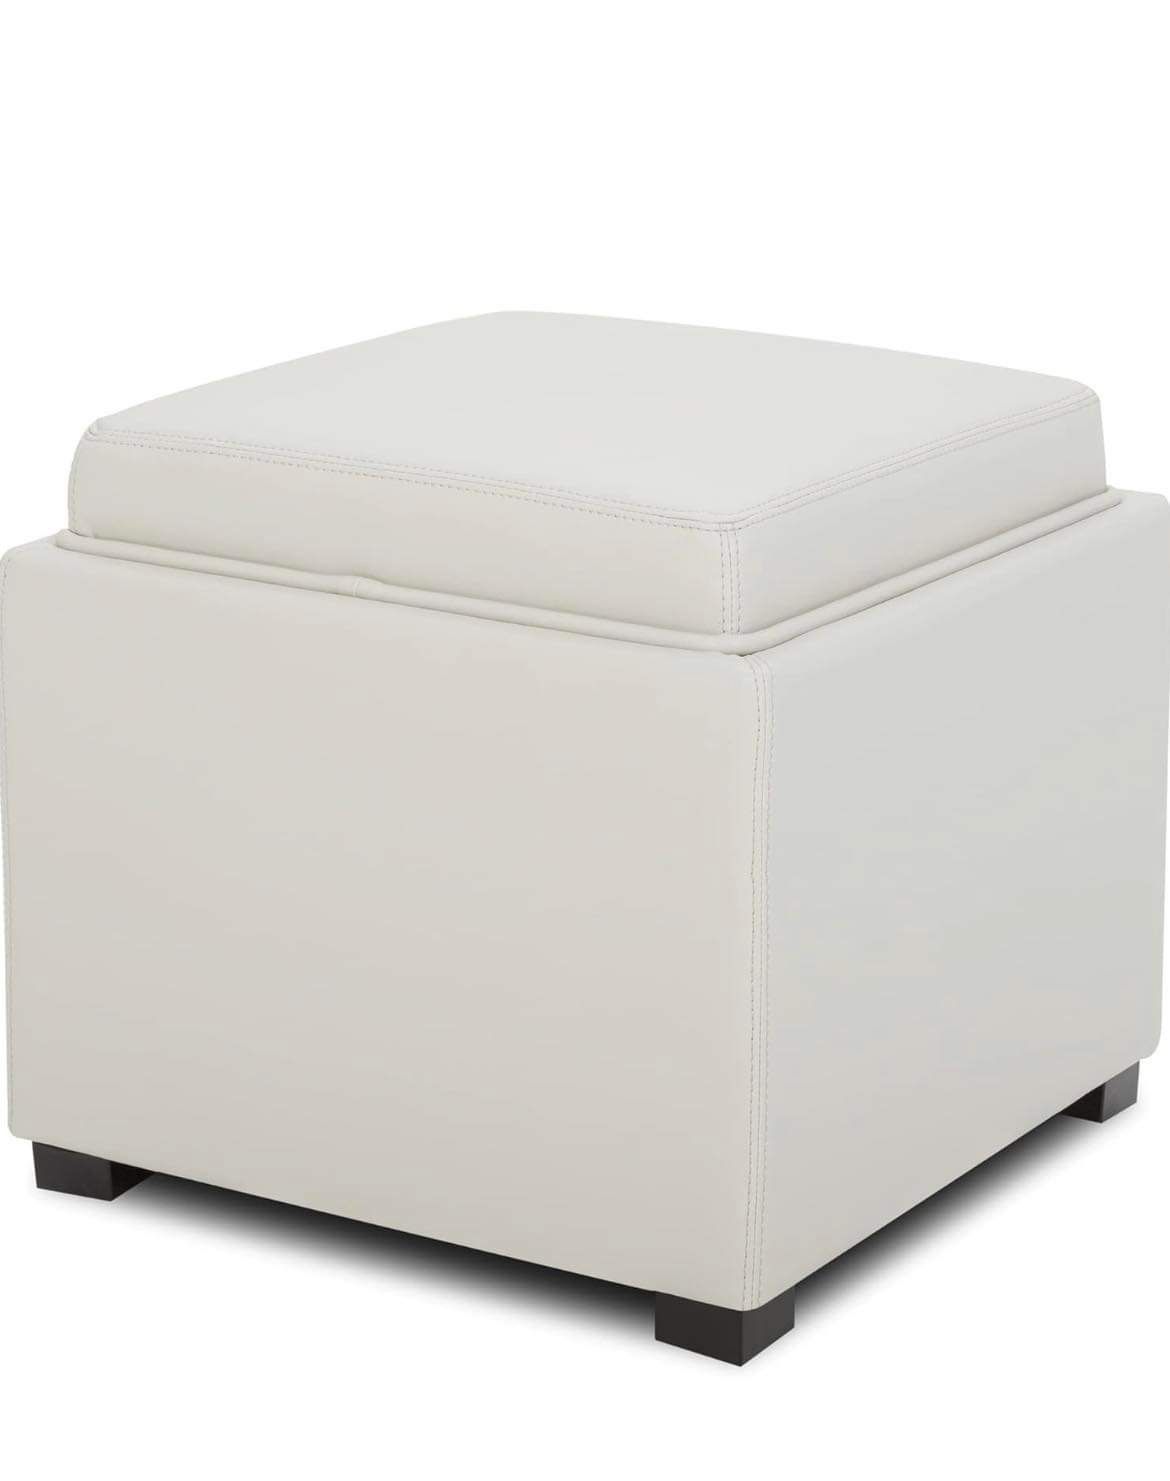 Storage Ottoman Cube with Tray,Footrest Stool Seat Serve as Side Table, PU Leather in Light Gray